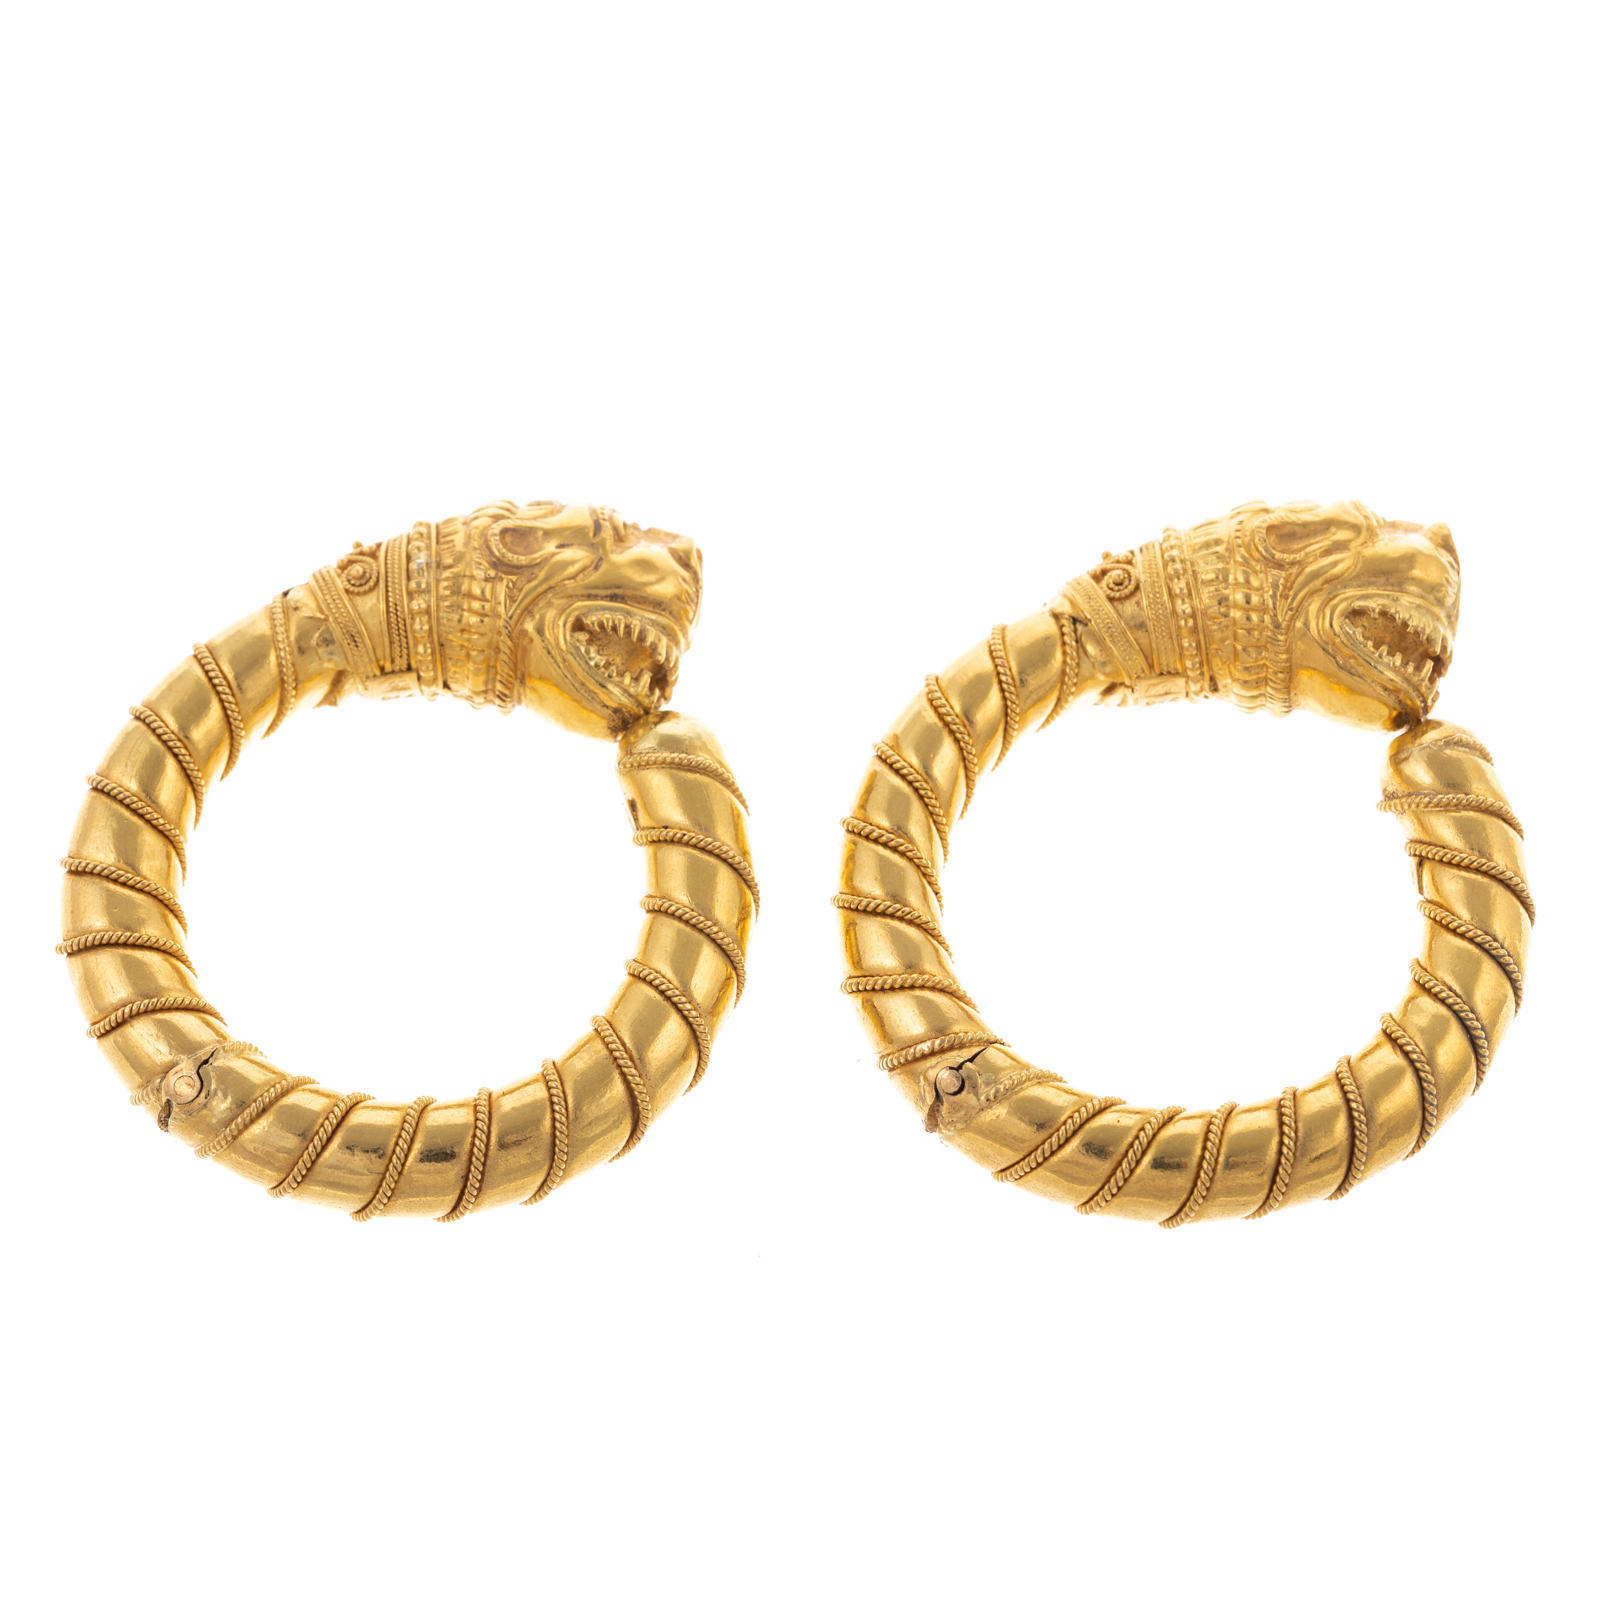 A 22K YELLOW GOLD HELLENISTIC PAIR 3348ee